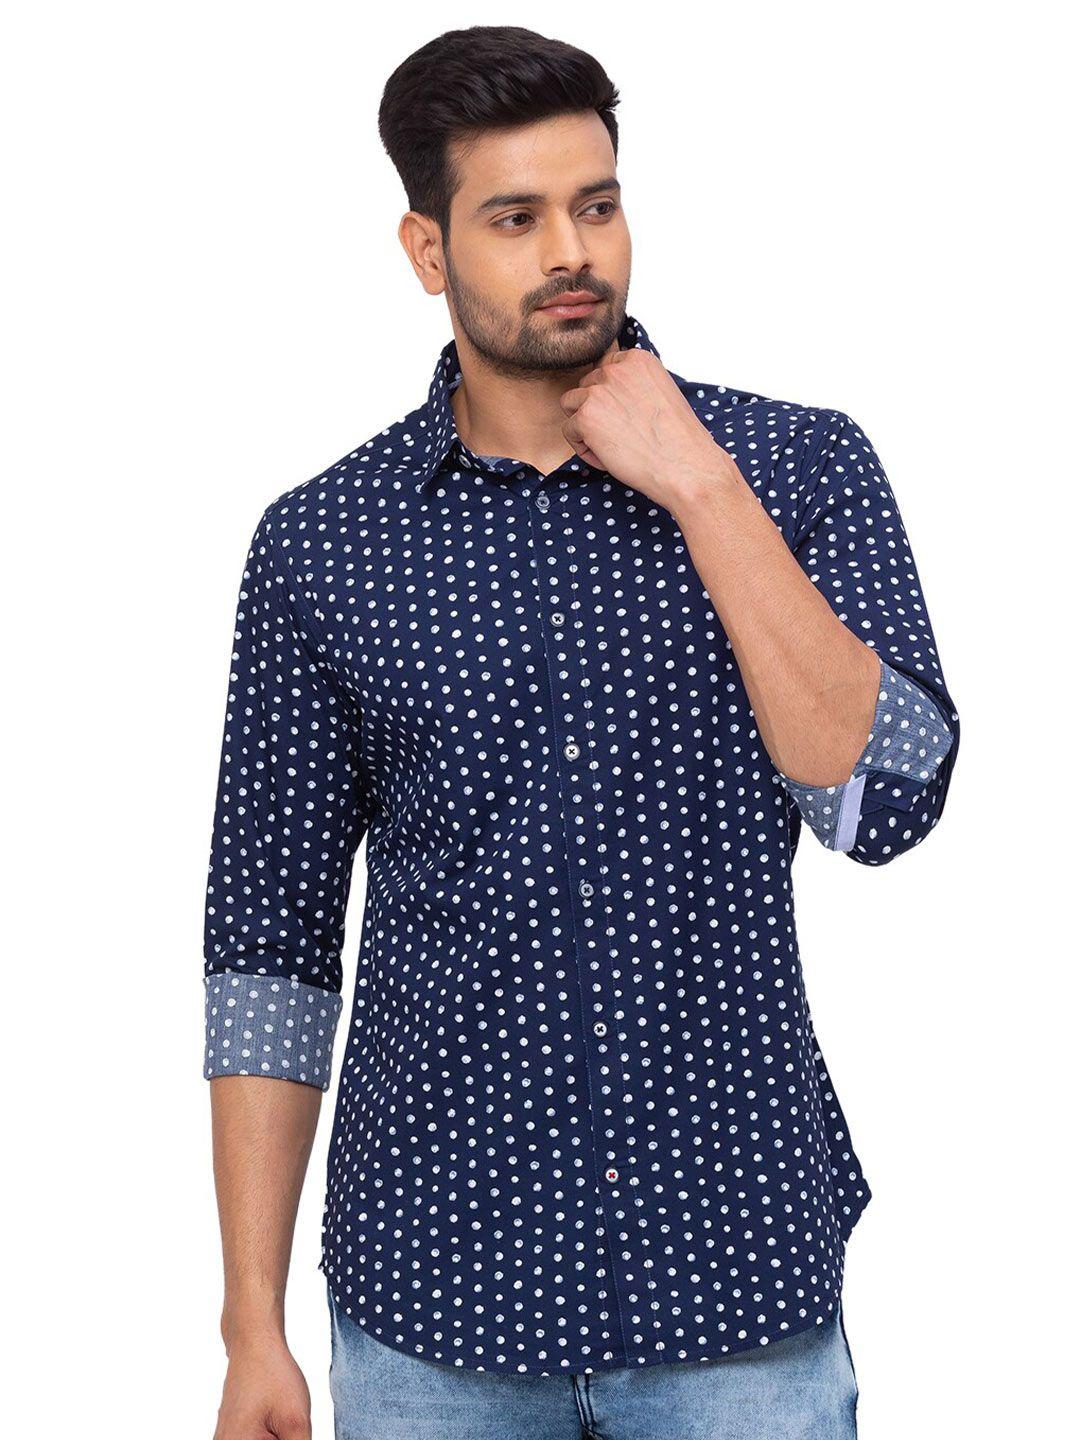 snx classic tailored fit polka dots printed pure cotton casual shirt